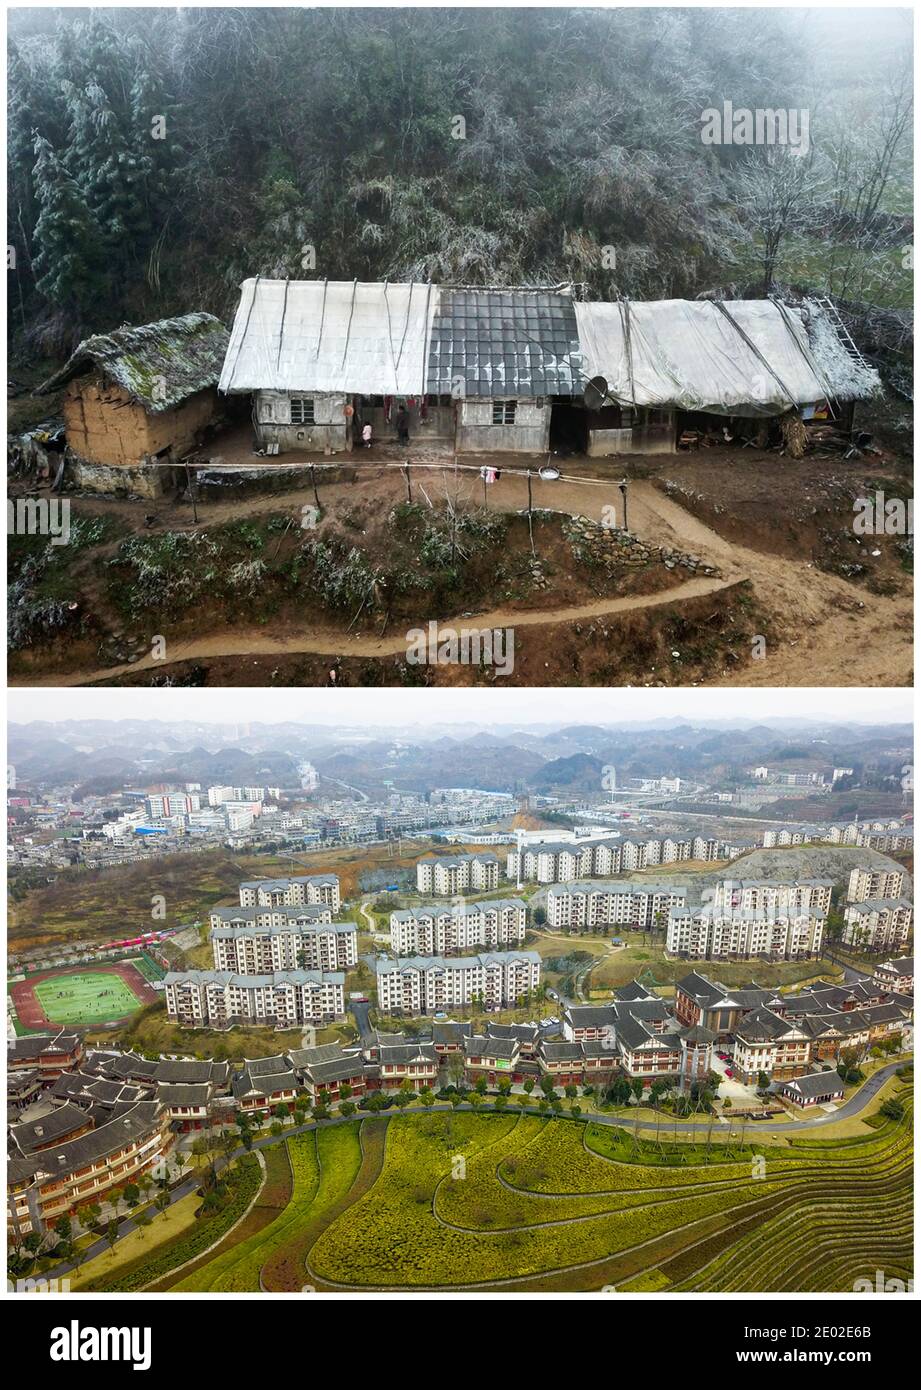 (201229) -- BIJIE, Dec. 29, 2020 (Xinhua) -- Combo aerial photo shows Li Changde's old house at Hetou Village of Sanyuan Township in Dafang County, southwest China's Guizhou Province, on Dec. 13, 2018 (top) and a newly-built community, where Li now lives, for poverty alleviation relocation at Shexiang ancient township of Dafang County on Dec. 24, 2020. Li Siyu, 8, and his 6-year-old sister Li Qingyi, formerly lived at Hetou Village as members of a poverty-stricken household. They had to spend nearly an hour walking to school everyday. Their parents worked at other cities and Li Changde, the 68 Stock Photo